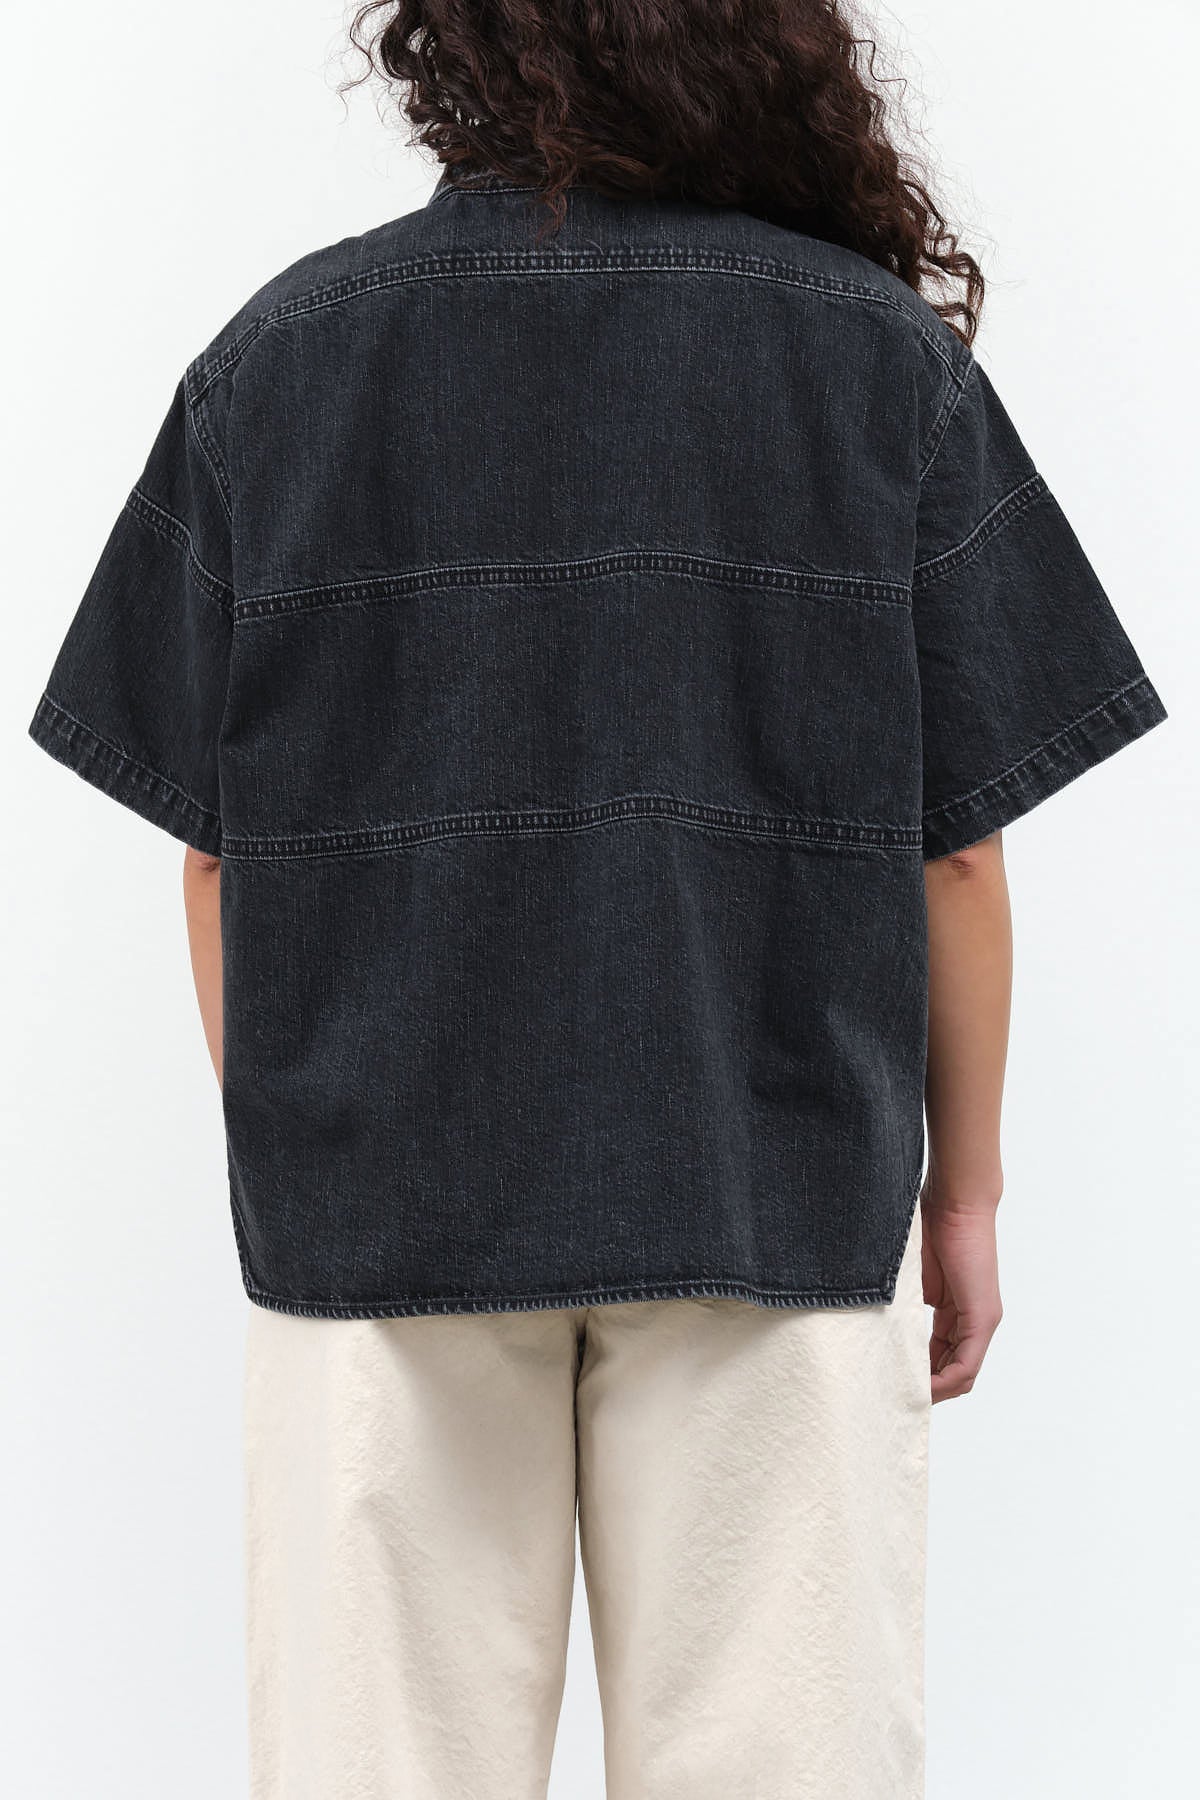 Back view of Nikka Top